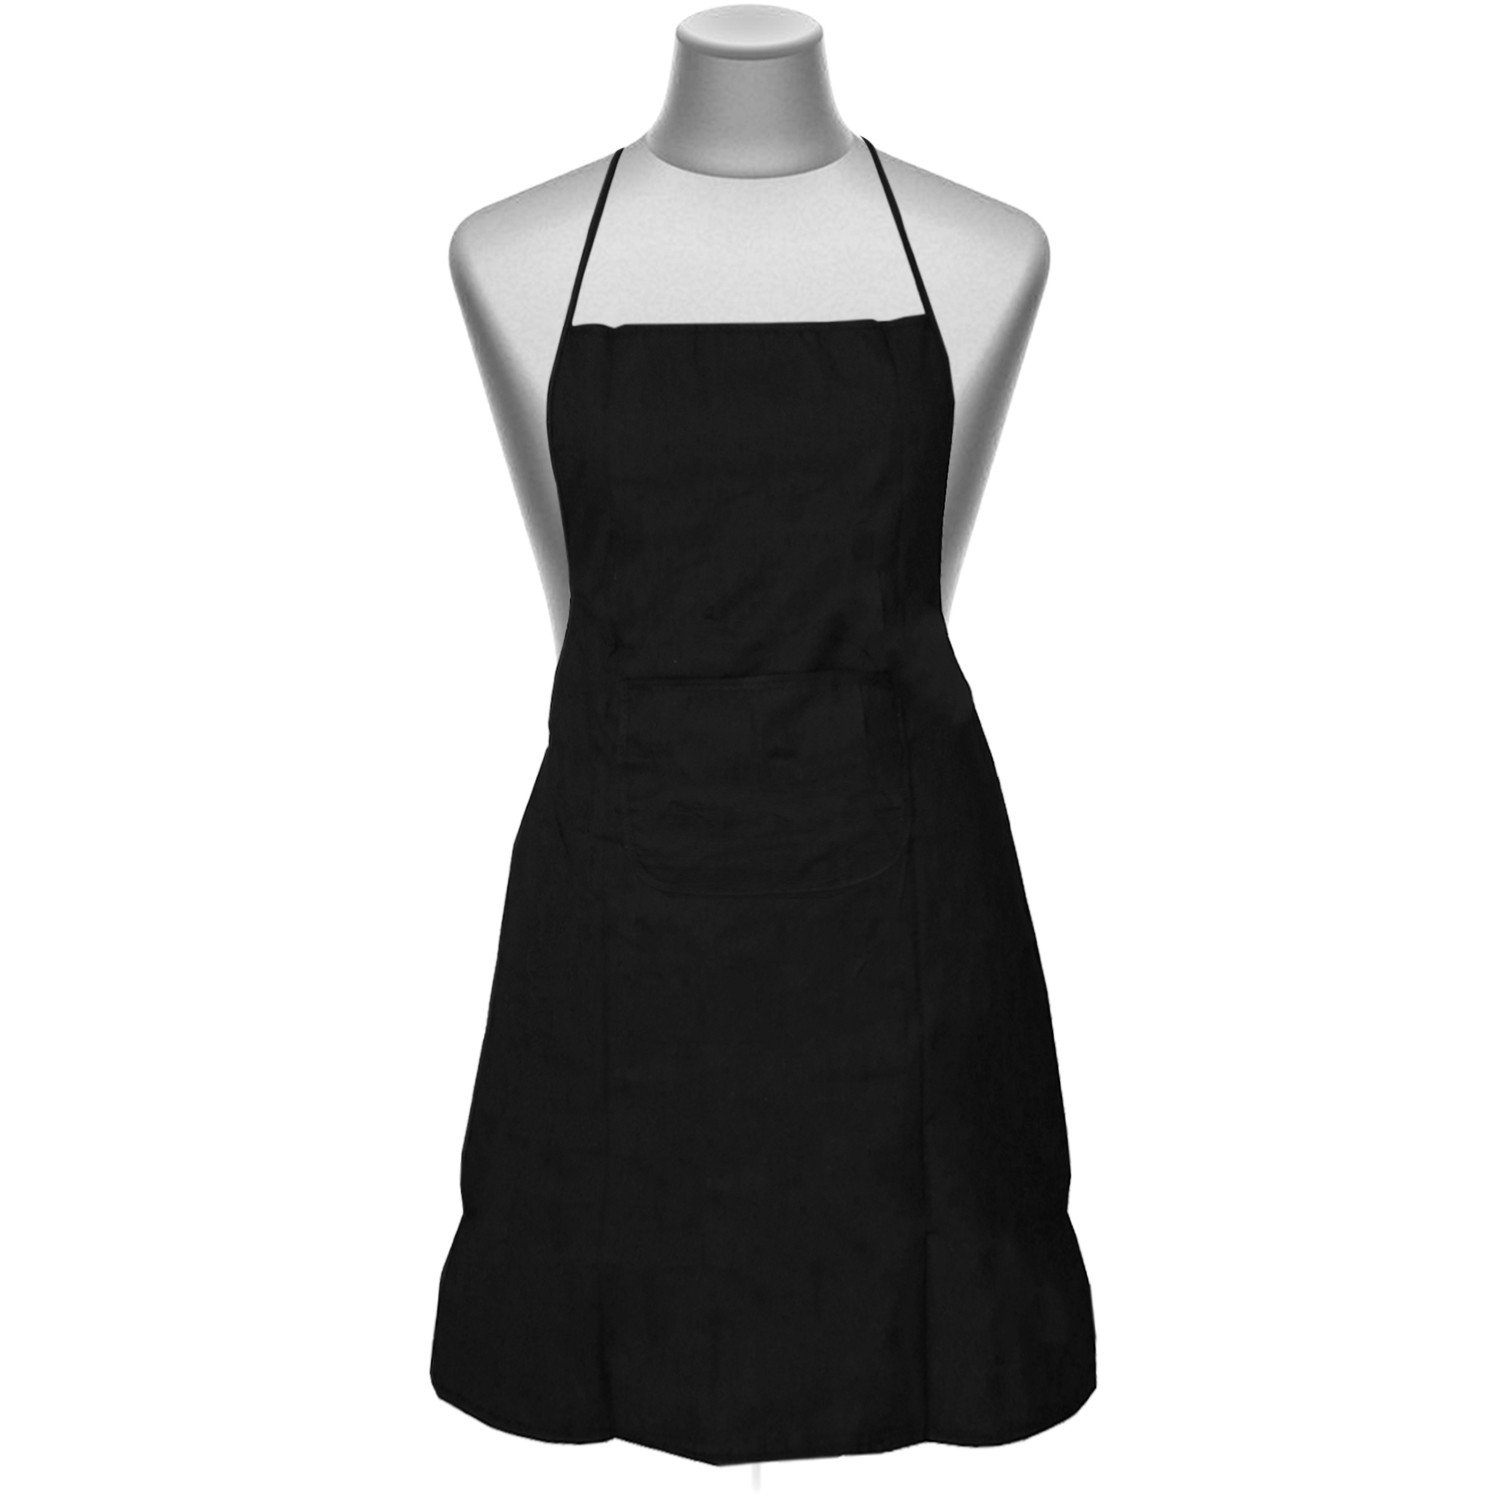 Kuber Industries Apron with 1 Front Pocket (Black)